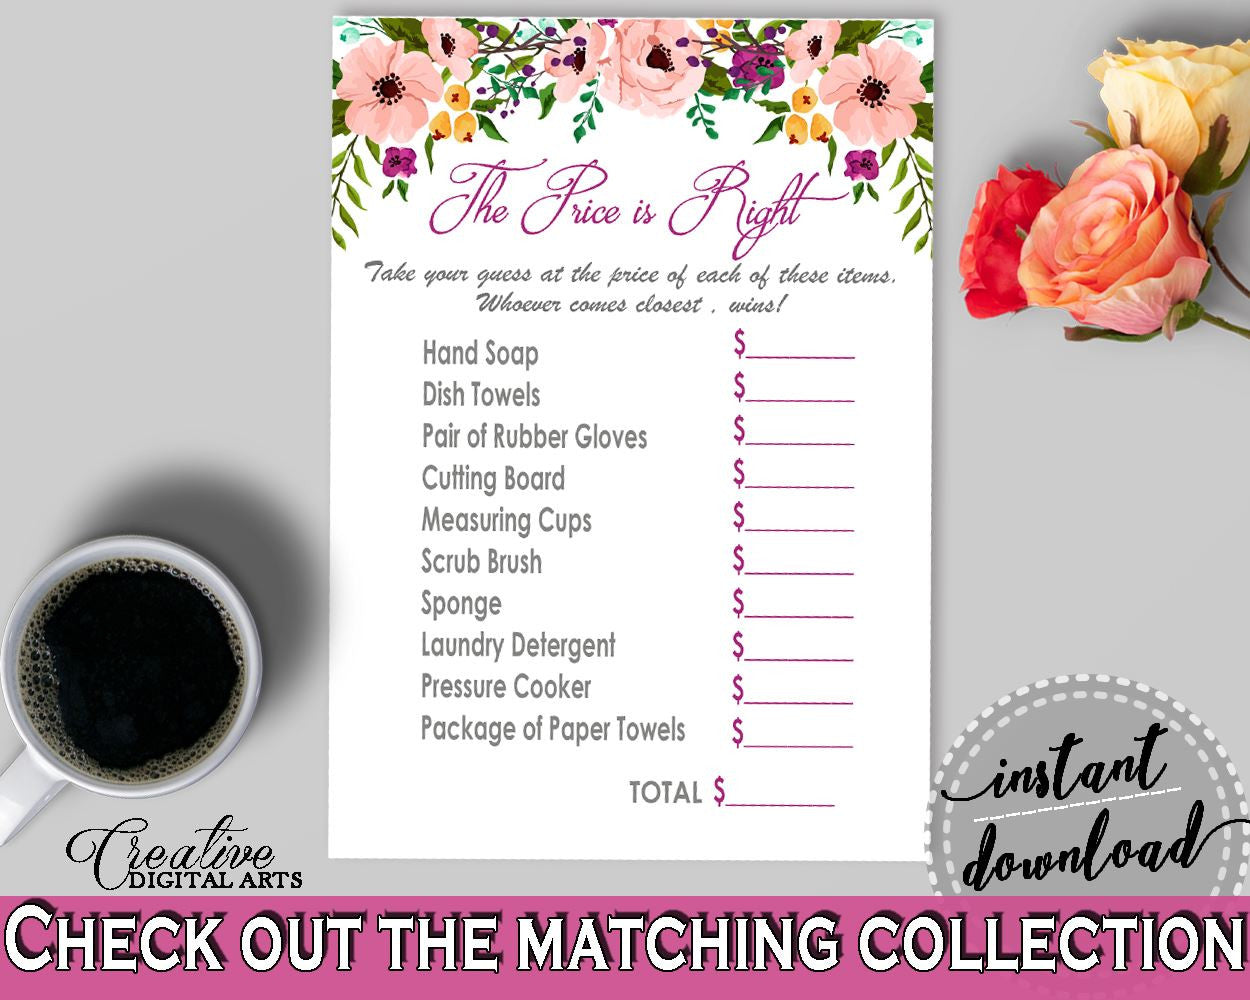 White And Pink Watercolor Flowers Bridal Shower Theme: The Price Is Right Game - price game, flowery shower, bridal shower idea - 9GOY4 - Digital Product